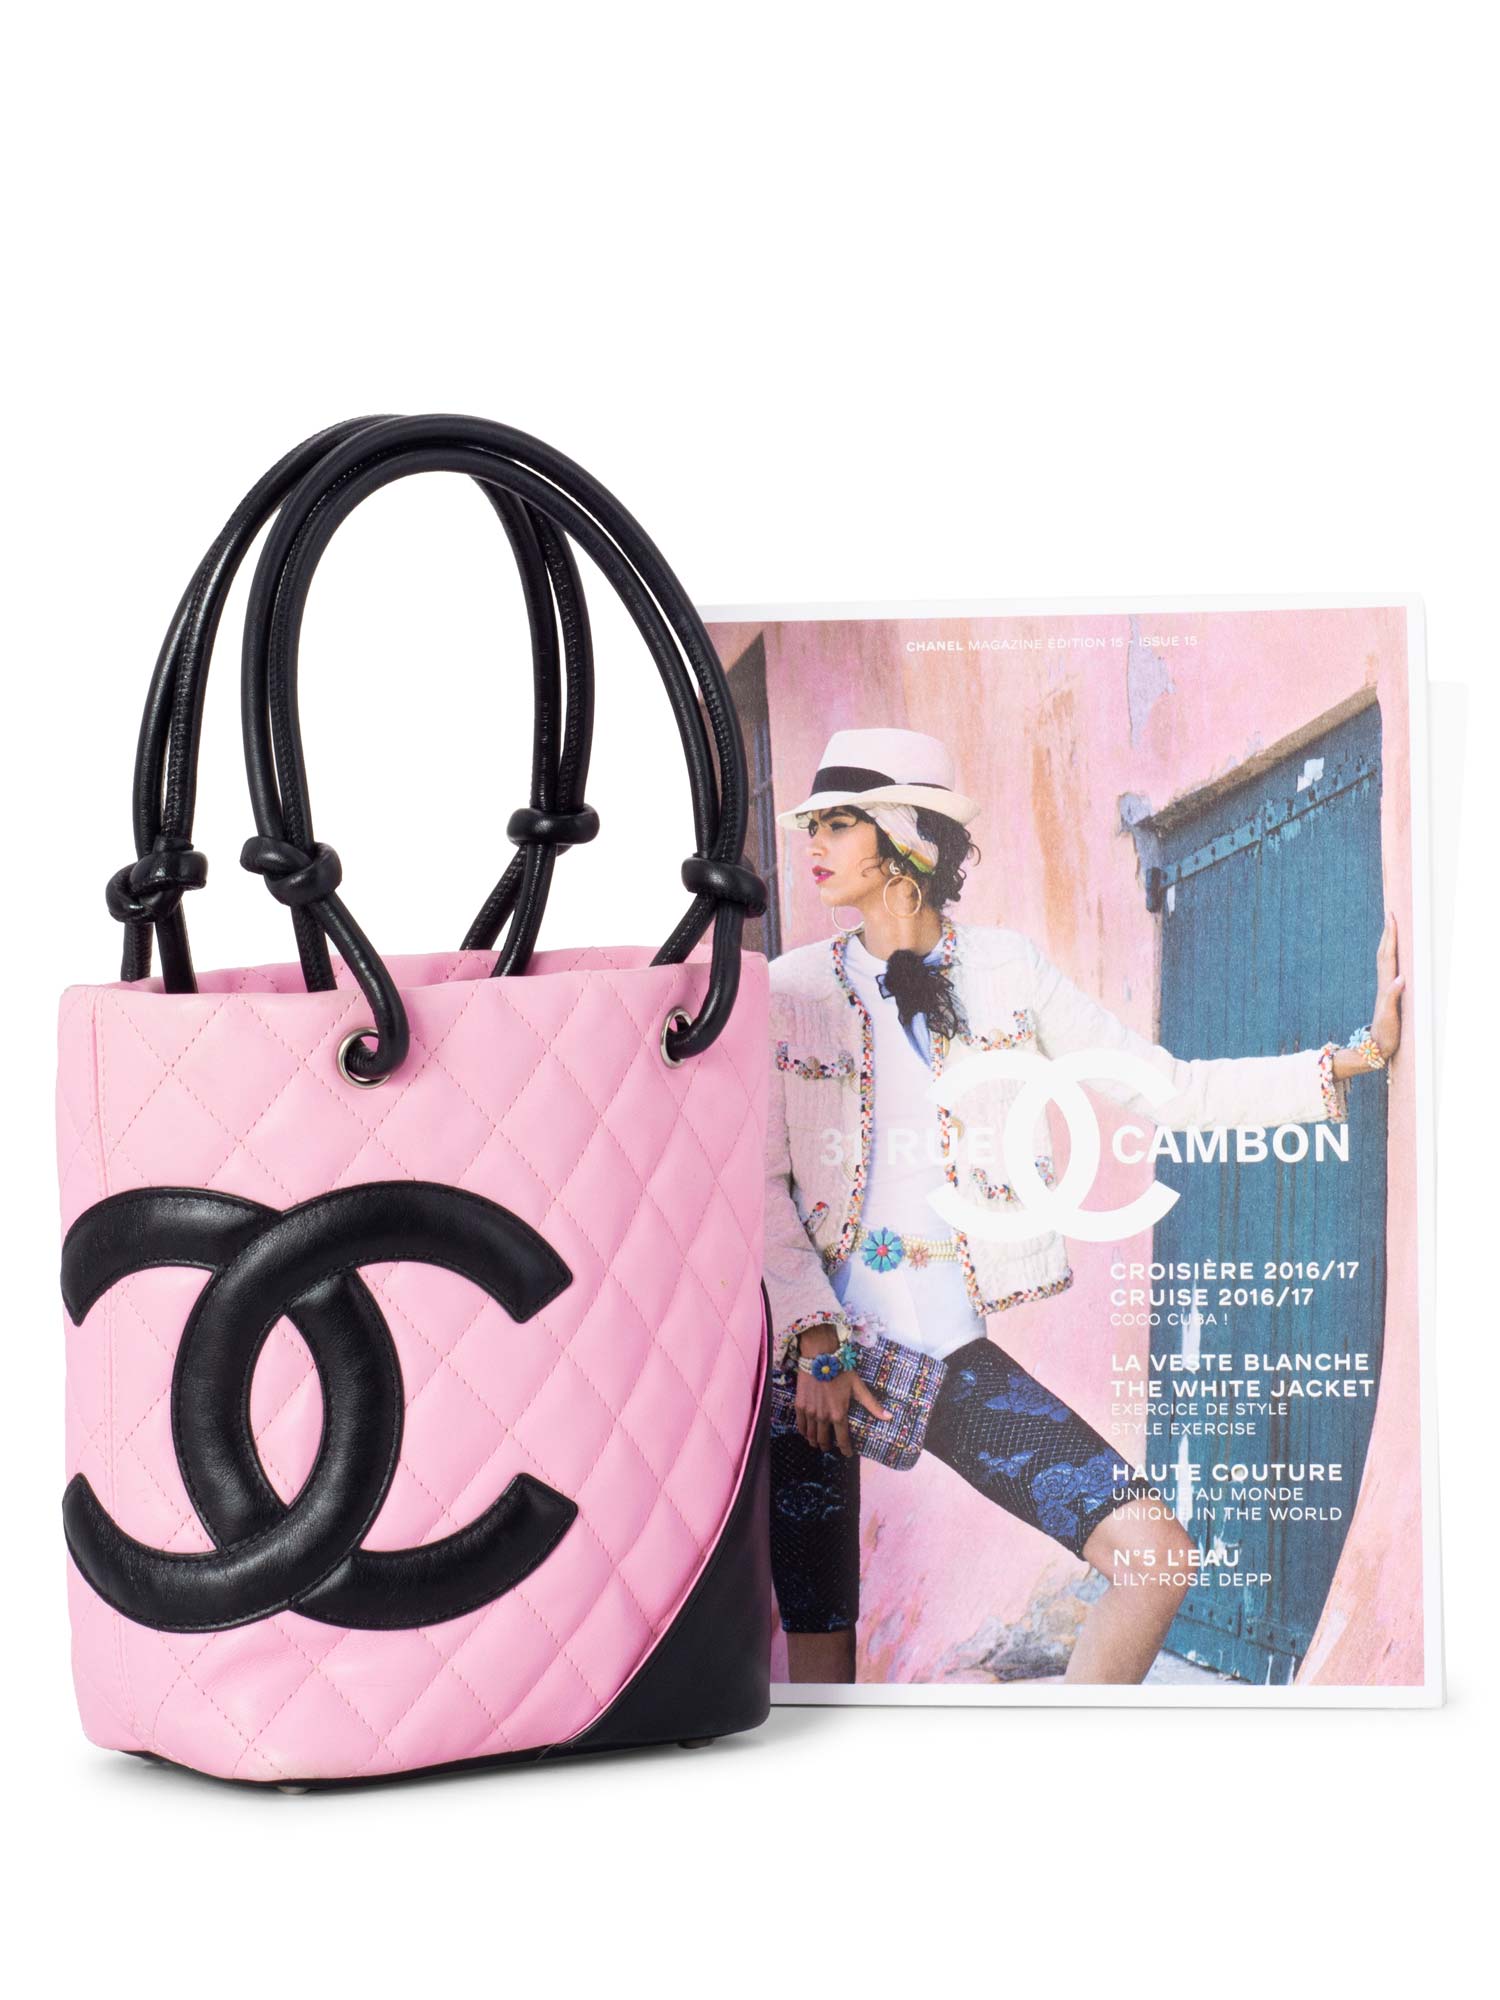 Chanel Quilted Leather Mini Cambon Bucket Bag Pink-designer resale